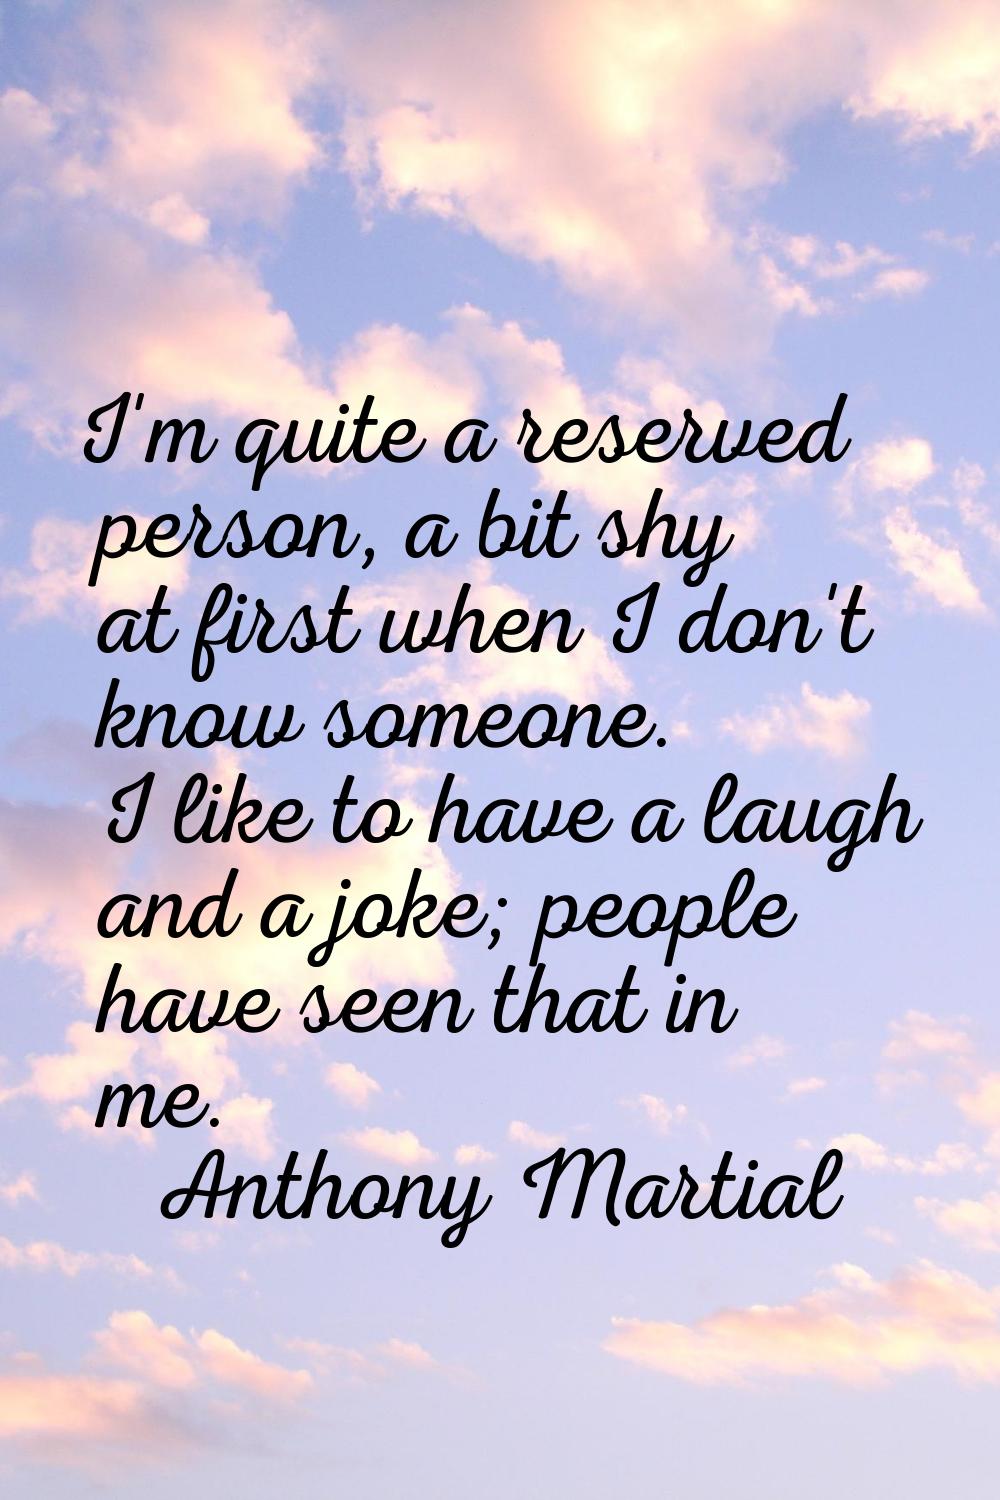 I'm quite a reserved person, a bit shy at first when I don't know someone. I like to have a laugh a